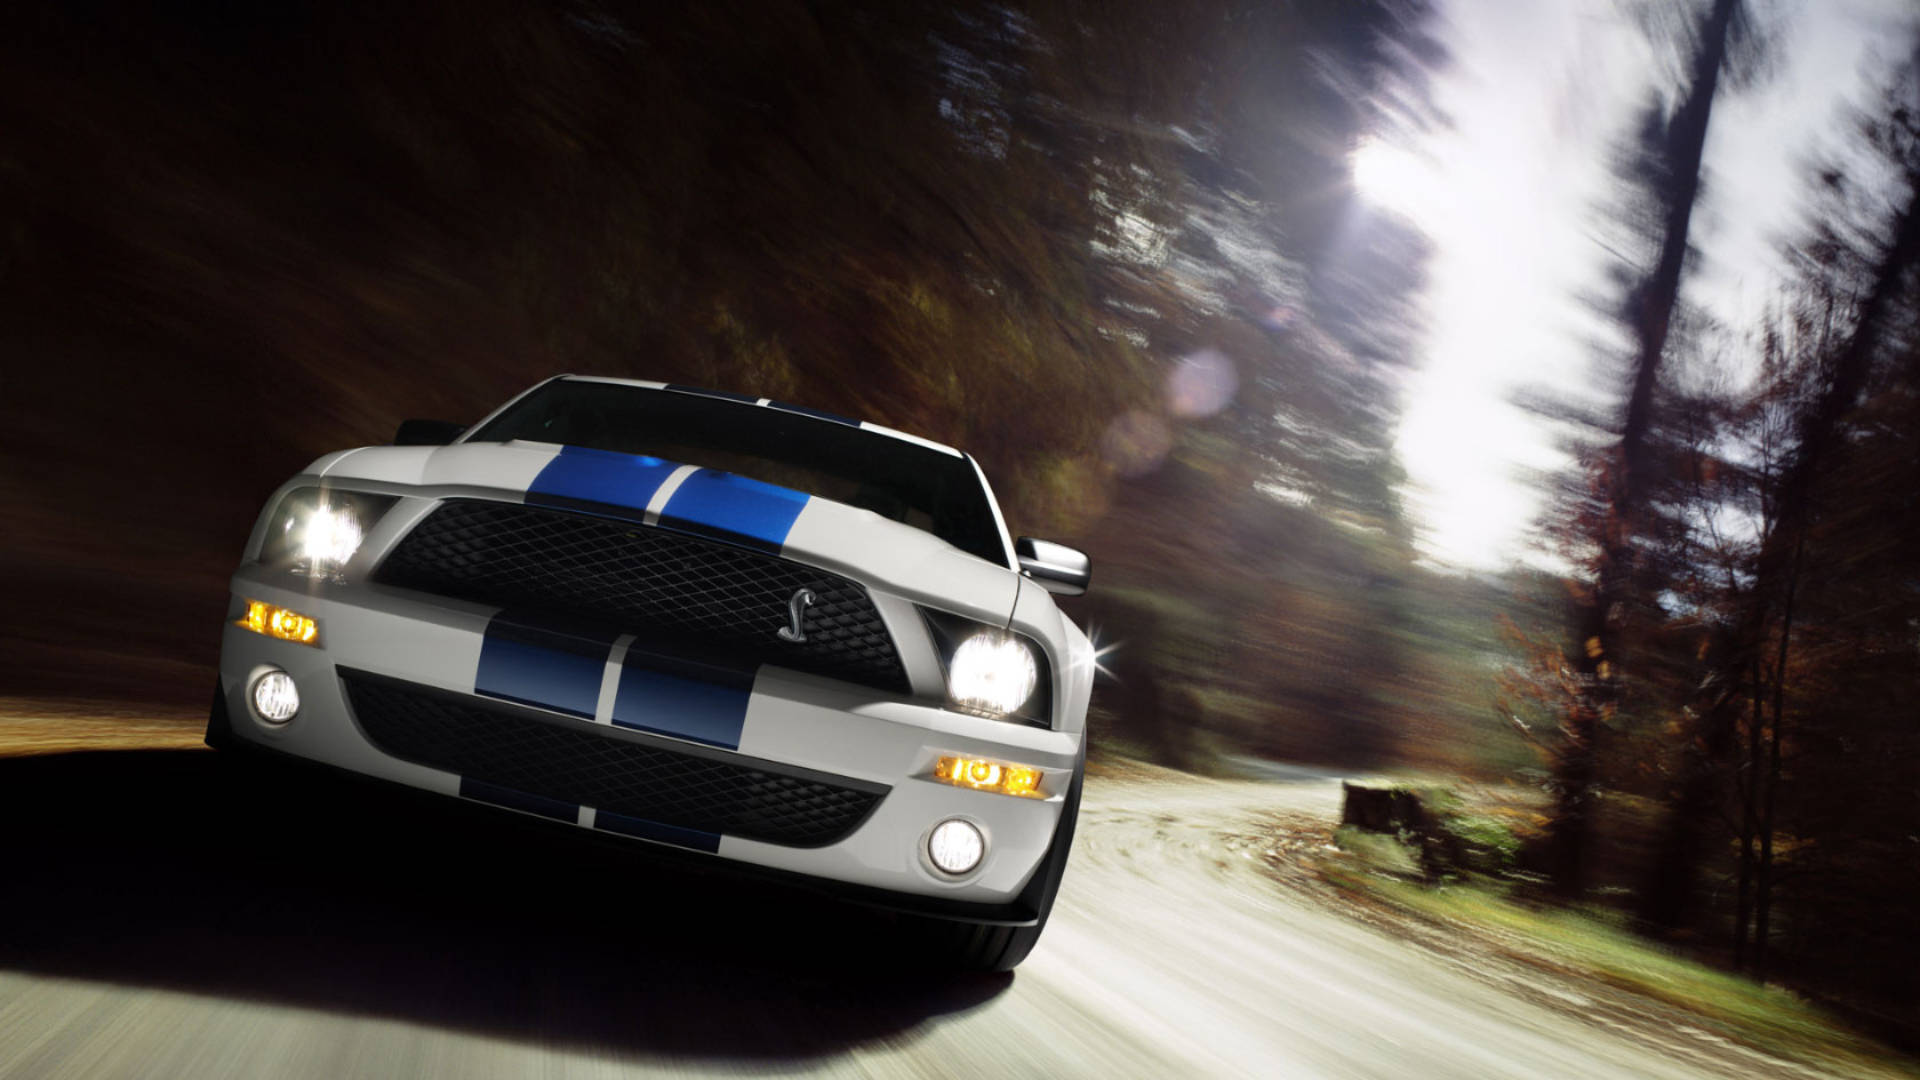 Speeding Ford Mustang in High Definition. Wallpaper